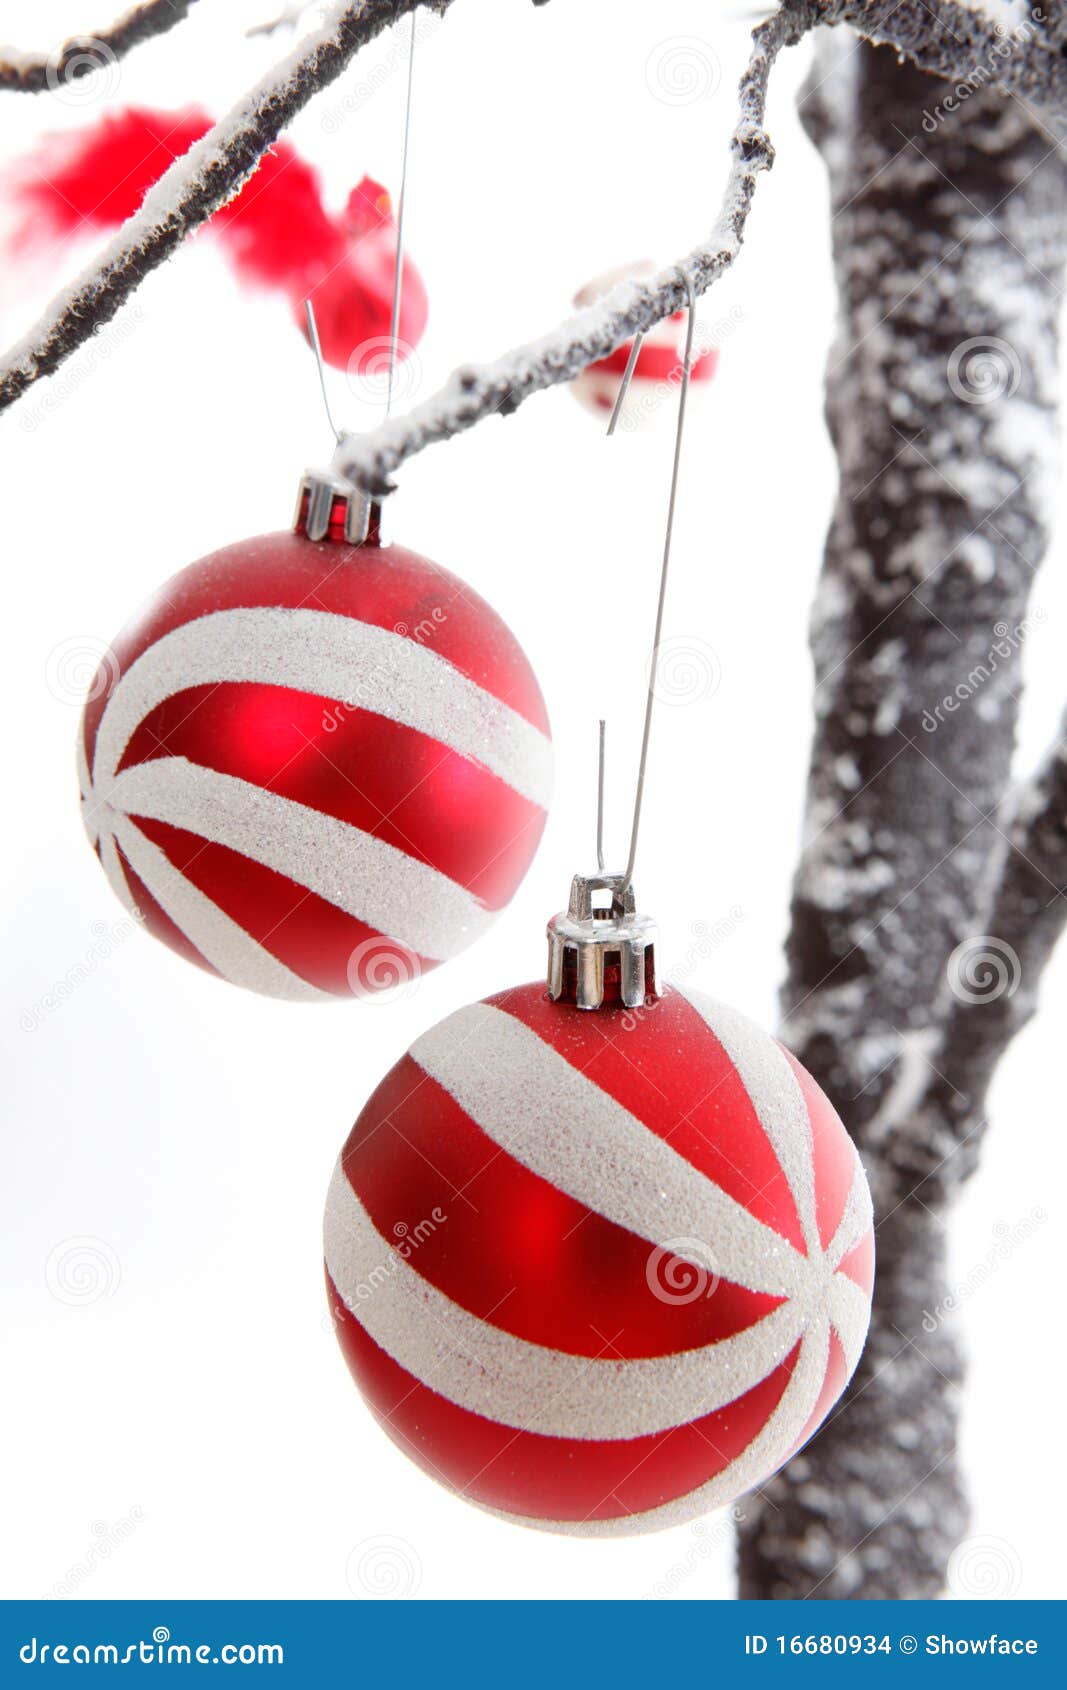 Christmas Decorations Baubles Stock Photo  Image of dangling, tree